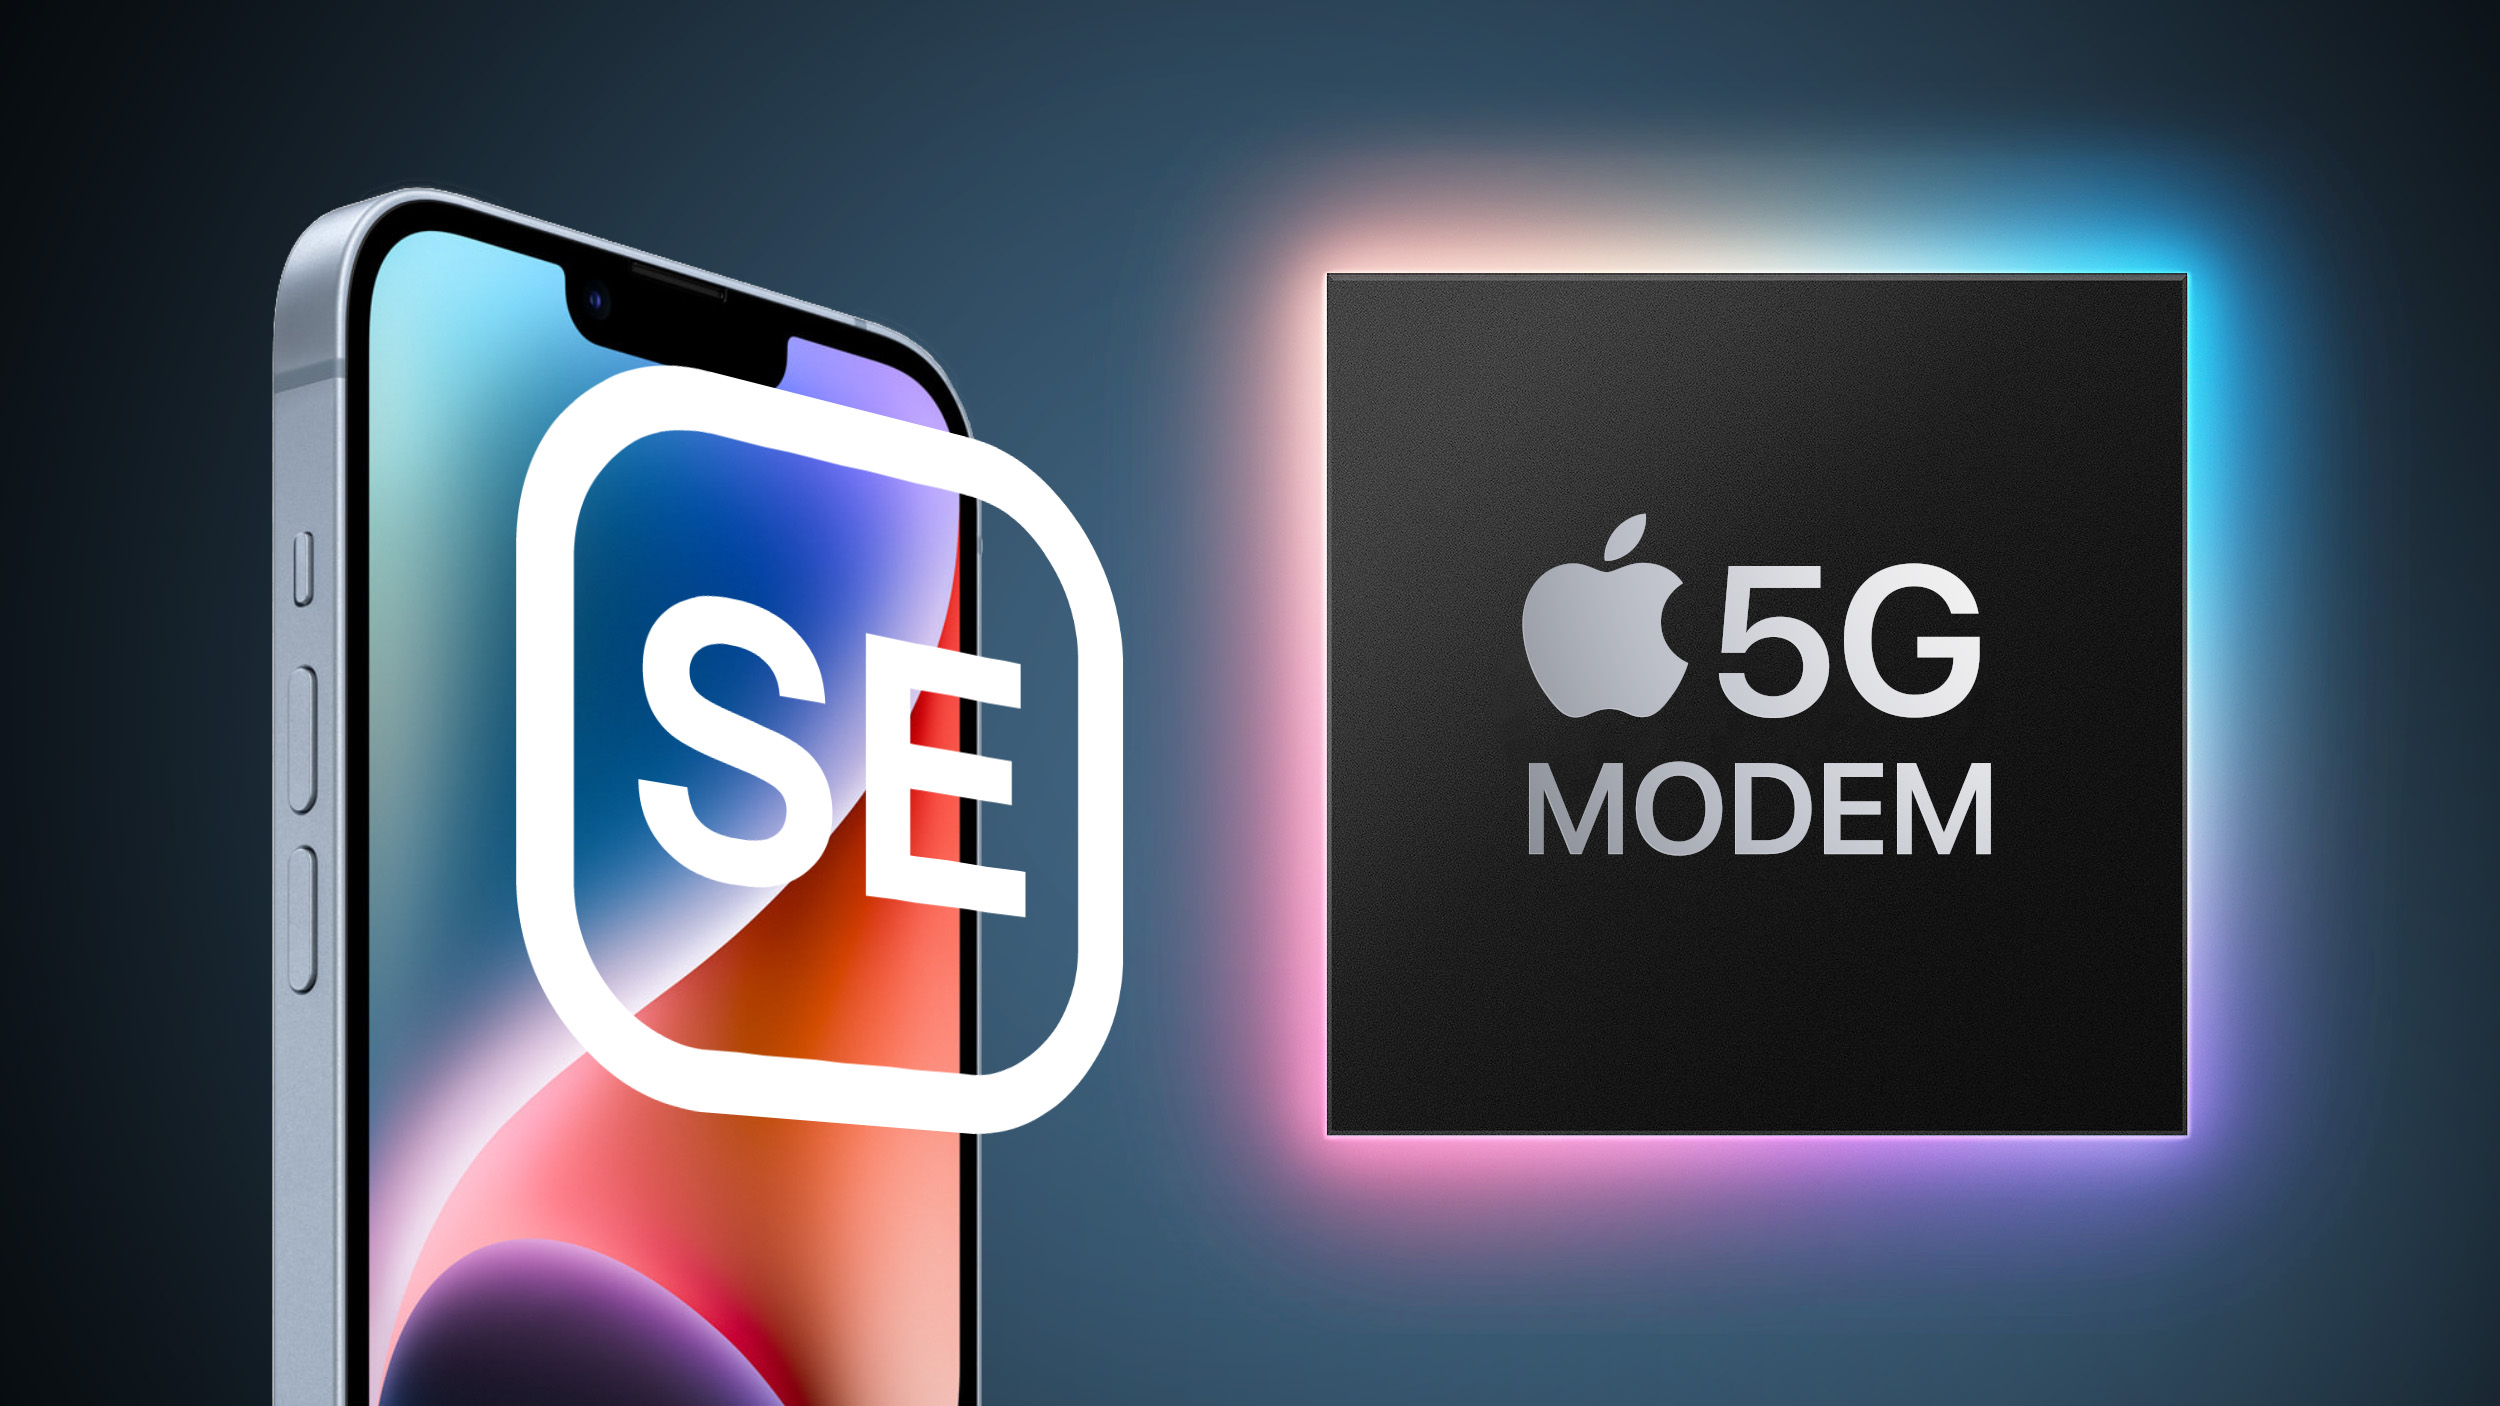 Apple may launch 'iPhone SE+ 5G' in 2023, with 5.7-inch screen - iPhone  Discussions on AppleInsider Forums